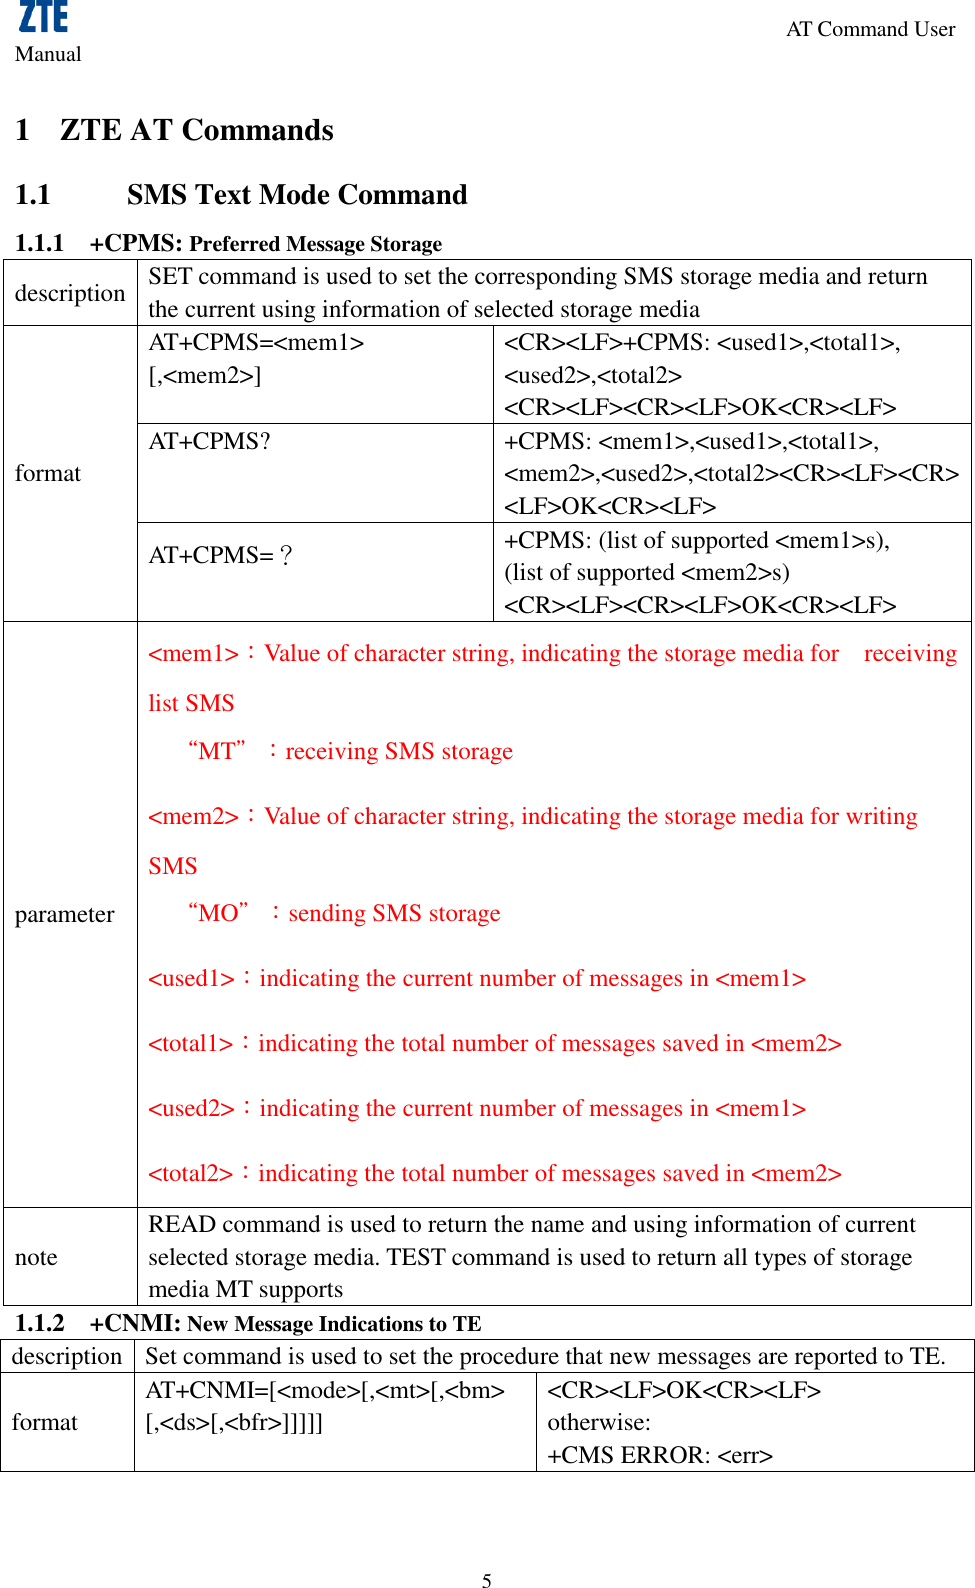                                                                      AT Command User Manual  5 1 ZTE AT Commands 1.1 SMS Text Mode Command 1.1.1 +CPMS: Preferred Message Storage description SET command is used to set the corresponding SMS storage media and return the current using information of selected storage media format AT+CPMS=&lt;mem1&gt; [,&lt;mem2&gt;] &lt;CR&gt;&lt;LF&gt;+CPMS: &lt;used1&gt;,&lt;total1&gt;, &lt;used2&gt;,&lt;total2&gt; &lt;CR&gt;&lt;LF&gt;&lt;CR&gt;&lt;LF&gt;OK&lt;CR&gt;&lt;LF&gt; AT+CPMS? +CPMS: &lt;mem1&gt;,&lt;used1&gt;,&lt;total1&gt;, &lt;mem2&gt;,&lt;used2&gt;,&lt;total2&gt;&lt;CR&gt;&lt;LF&gt;&lt;CR&gt; &lt;LF&gt;OK&lt;CR&gt;&lt;LF&gt;   AT+CPMS=？ +CPMS: (list of supported &lt;mem1&gt;s), (list of supported &lt;mem2&gt;s) &lt;CR&gt;&lt;LF&gt;&lt;CR&gt;&lt;LF&gt;OK&lt;CR&gt;&lt;LF&gt; parameter &lt;mem1&gt;：Value of character string, indicating the storage media for    receiving list SMS   “MT”：receiving SMS storage &lt;mem2&gt;：Value of character string, indicating the storage media for writing SMS “MO”：sending SMS storage &lt;used1&gt;：indicating the current number of messages in &lt;mem1&gt; &lt;total1&gt;：indicating the total number of messages saved in &lt;mem2&gt;   &lt;used2&gt;：indicating the current number of messages in &lt;mem1&gt; &lt;total2&gt;：indicating the total number of messages saved in &lt;mem2&gt;   note READ command is used to return the name and using information of current selected storage media. TEST command is used to return all types of storage media MT supports 1.1.2 +CNMI: New Message Indications to TE description Set command is used to set the procedure that new messages are reported to TE. format AT+CNMI=[&lt;mode&gt;[,&lt;mt&gt;[,&lt;bm&gt; [,&lt;ds&gt;[,&lt;bfr&gt;]]]]] &lt;CR&gt;&lt;LF&gt;OK&lt;CR&gt;&lt;LF&gt;   otherwise: +CMS ERROR: &lt;err&gt; 